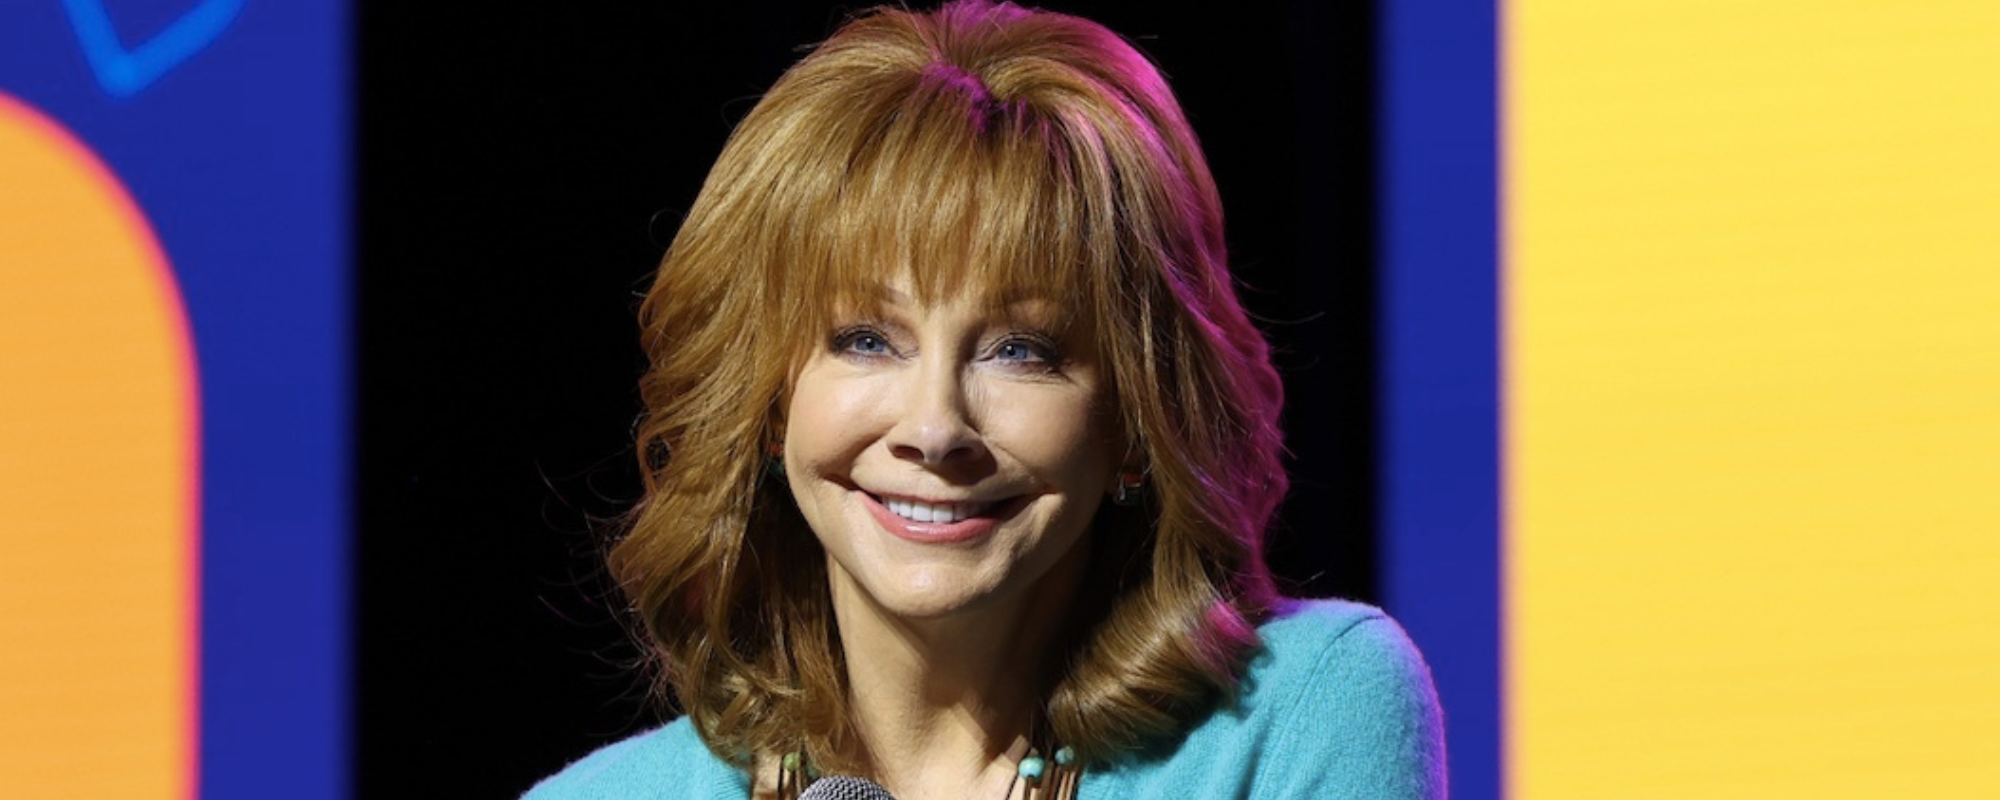 Reba McEntire Launches Lifestyle Book ‘Not That Fancy’ to the Top of Multiple Bestseller Lists